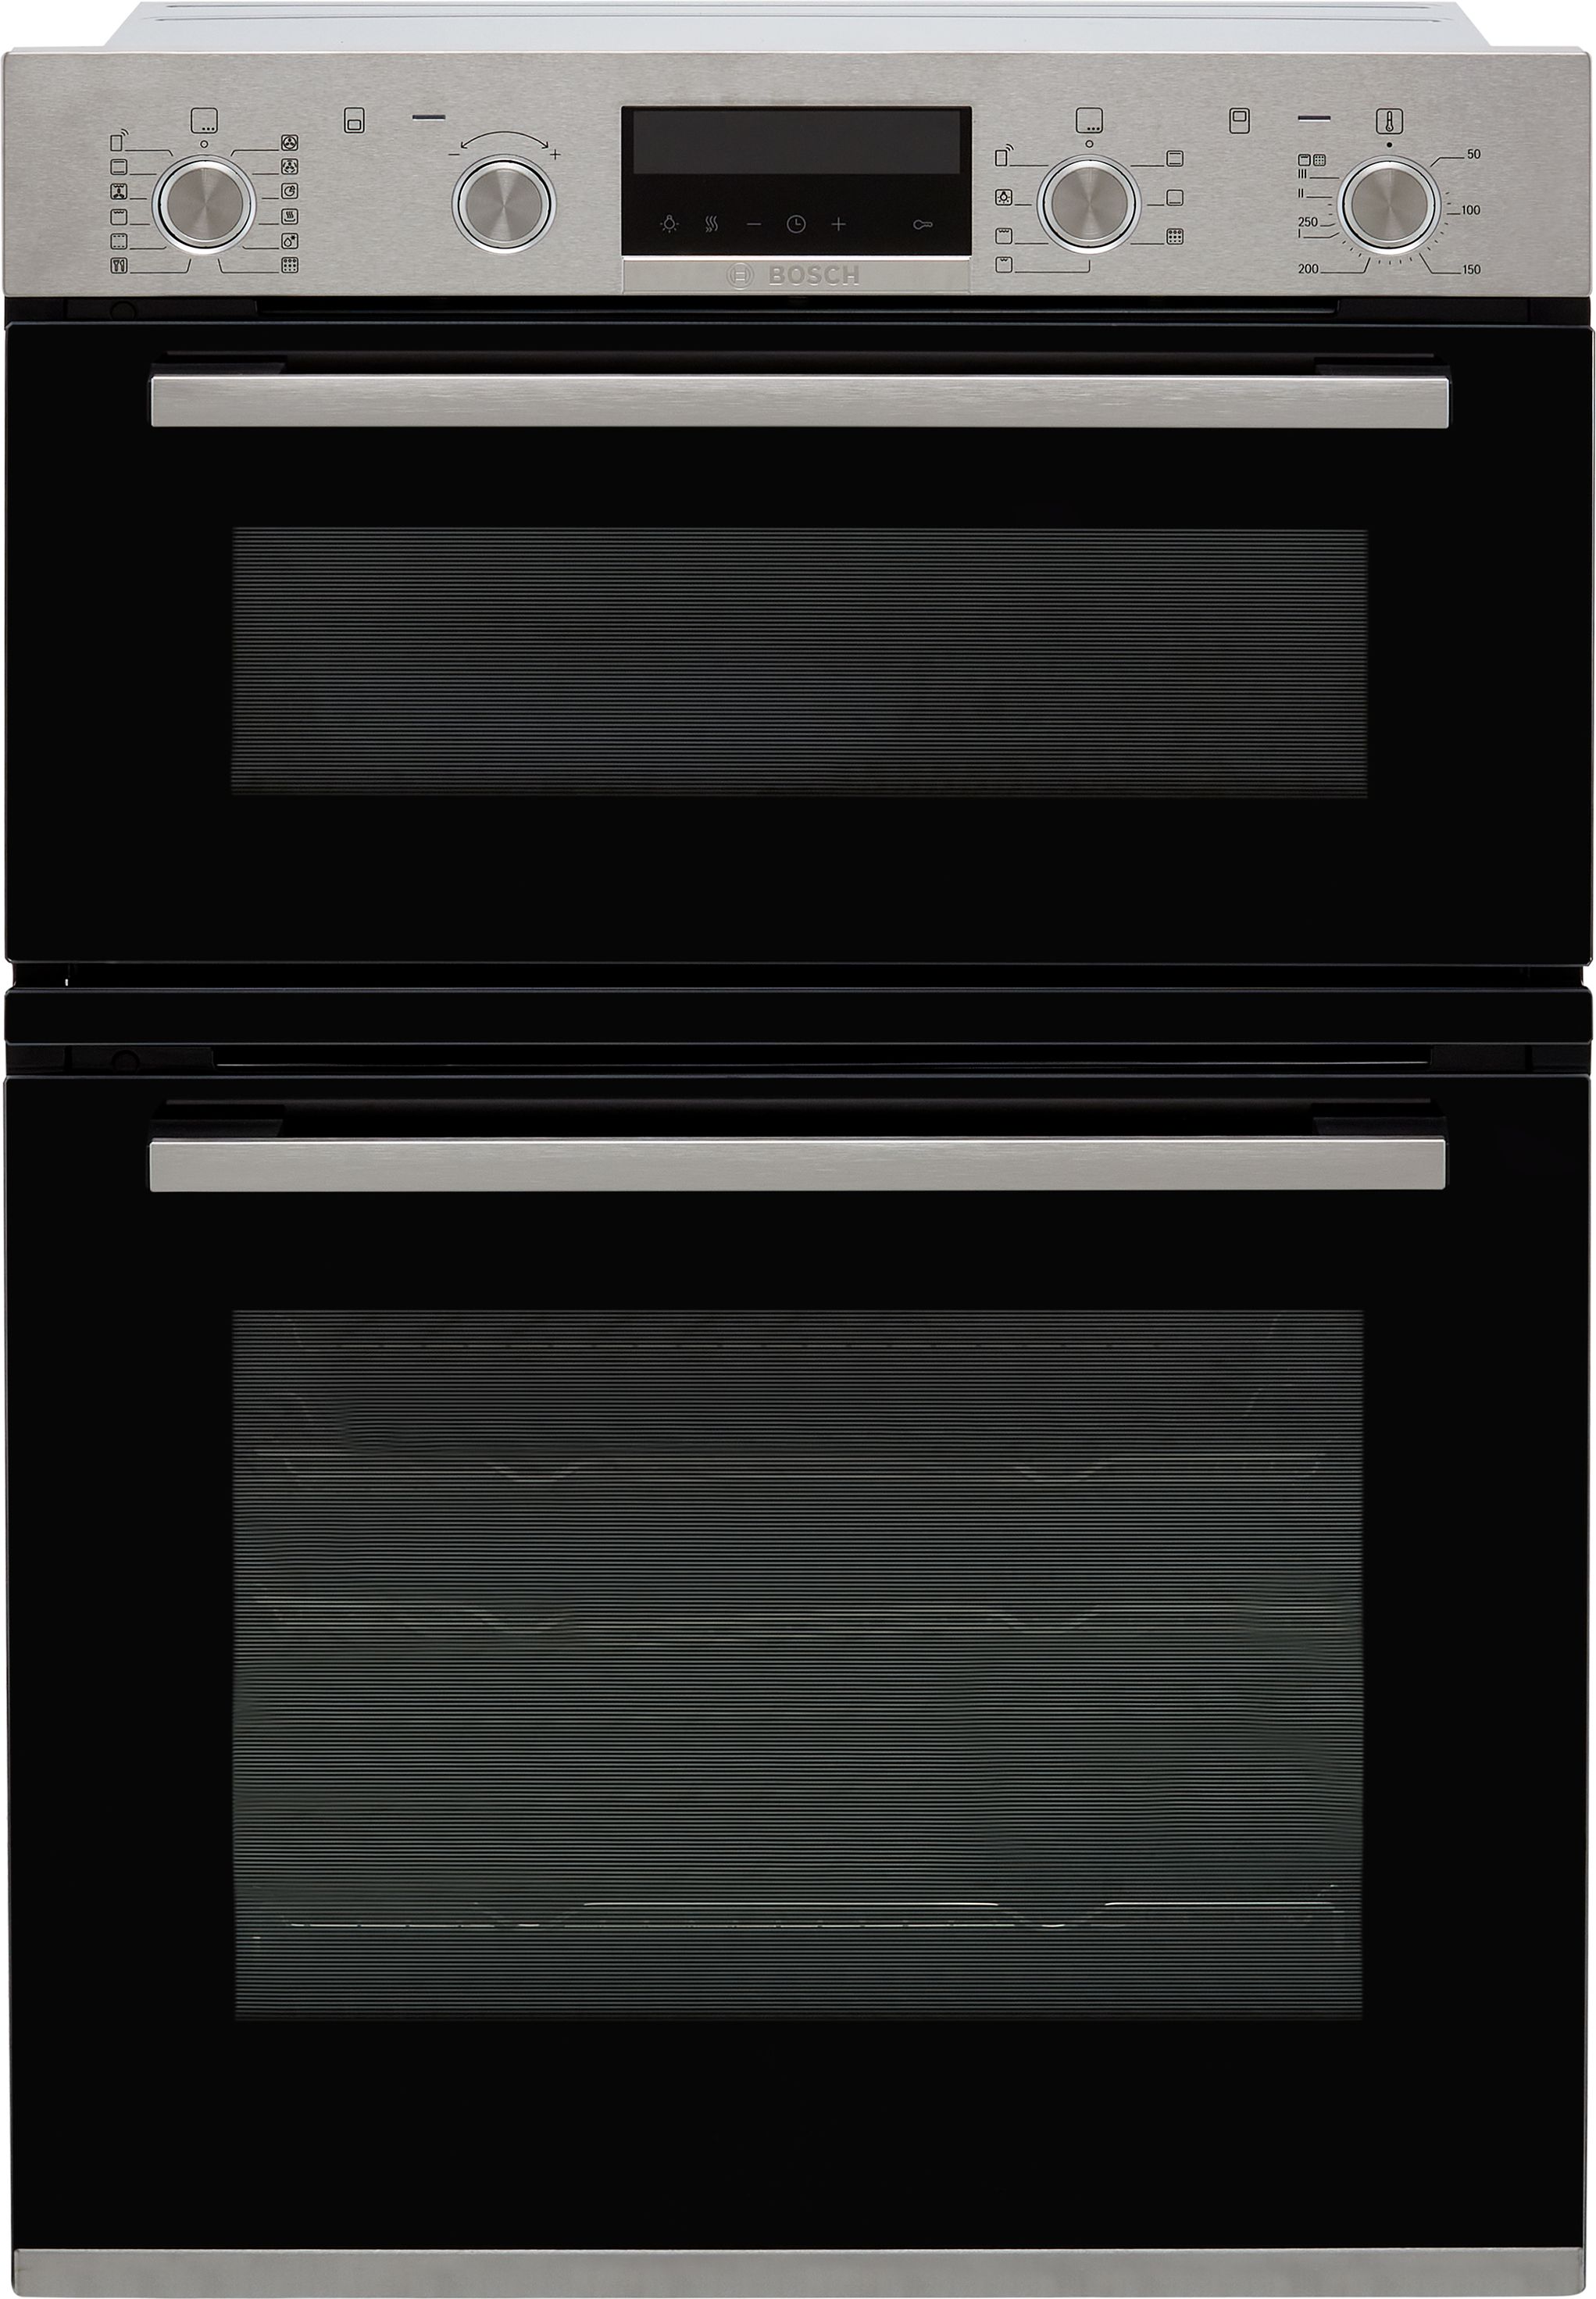 Bosch Series 6 MBA5785S6B Built In WiFi Connected Electric Double Oven with Pyrolytic Cleaning - Stainless Steel - A/B Rated, Stainless Steel